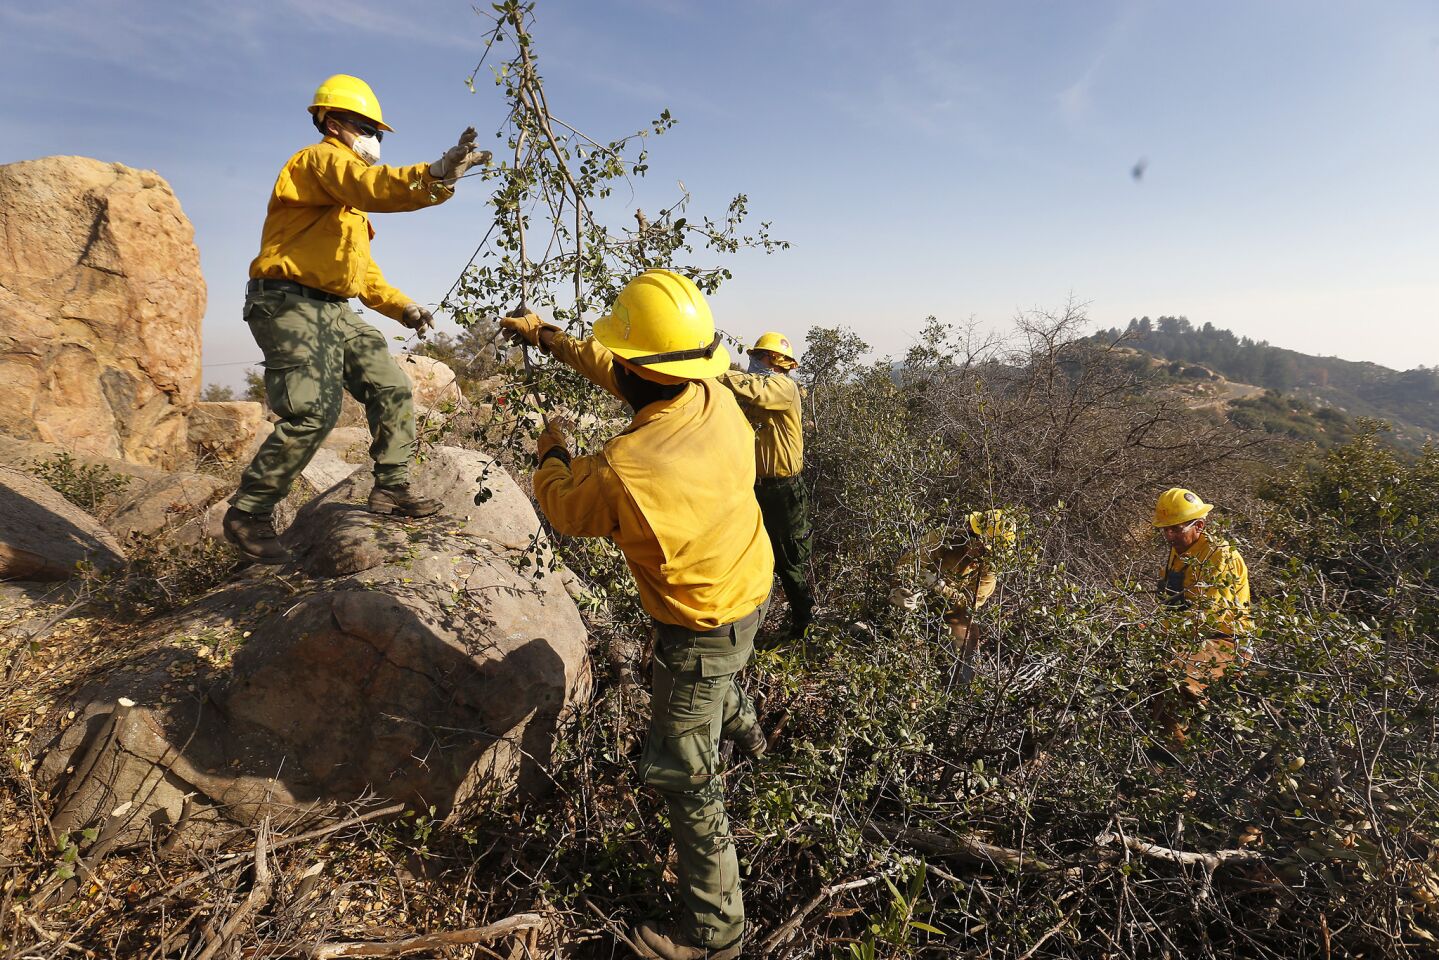 Forest Service crews cut and clear dense brush for contingency lines off of East Camino Cielo in the Santa Ynez Mountains above Montecito and Santa Barbara to help stop the Thomas fire from advancing.